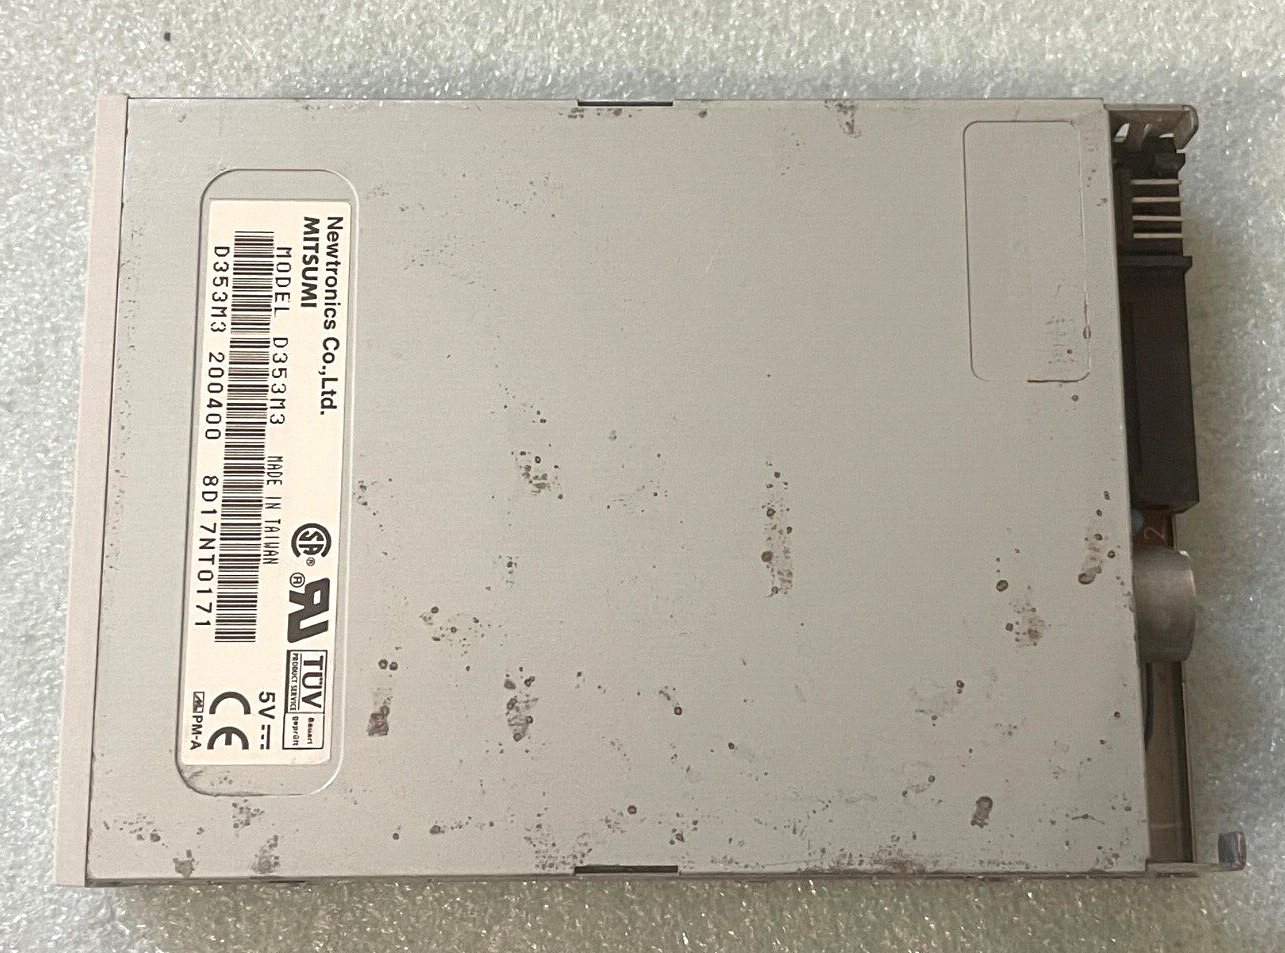 TESTED PULL MITSUMI D353M3 1.44MB FLOPPY DISK DRIVE FULL FACE PLATE BLEM BXDR3